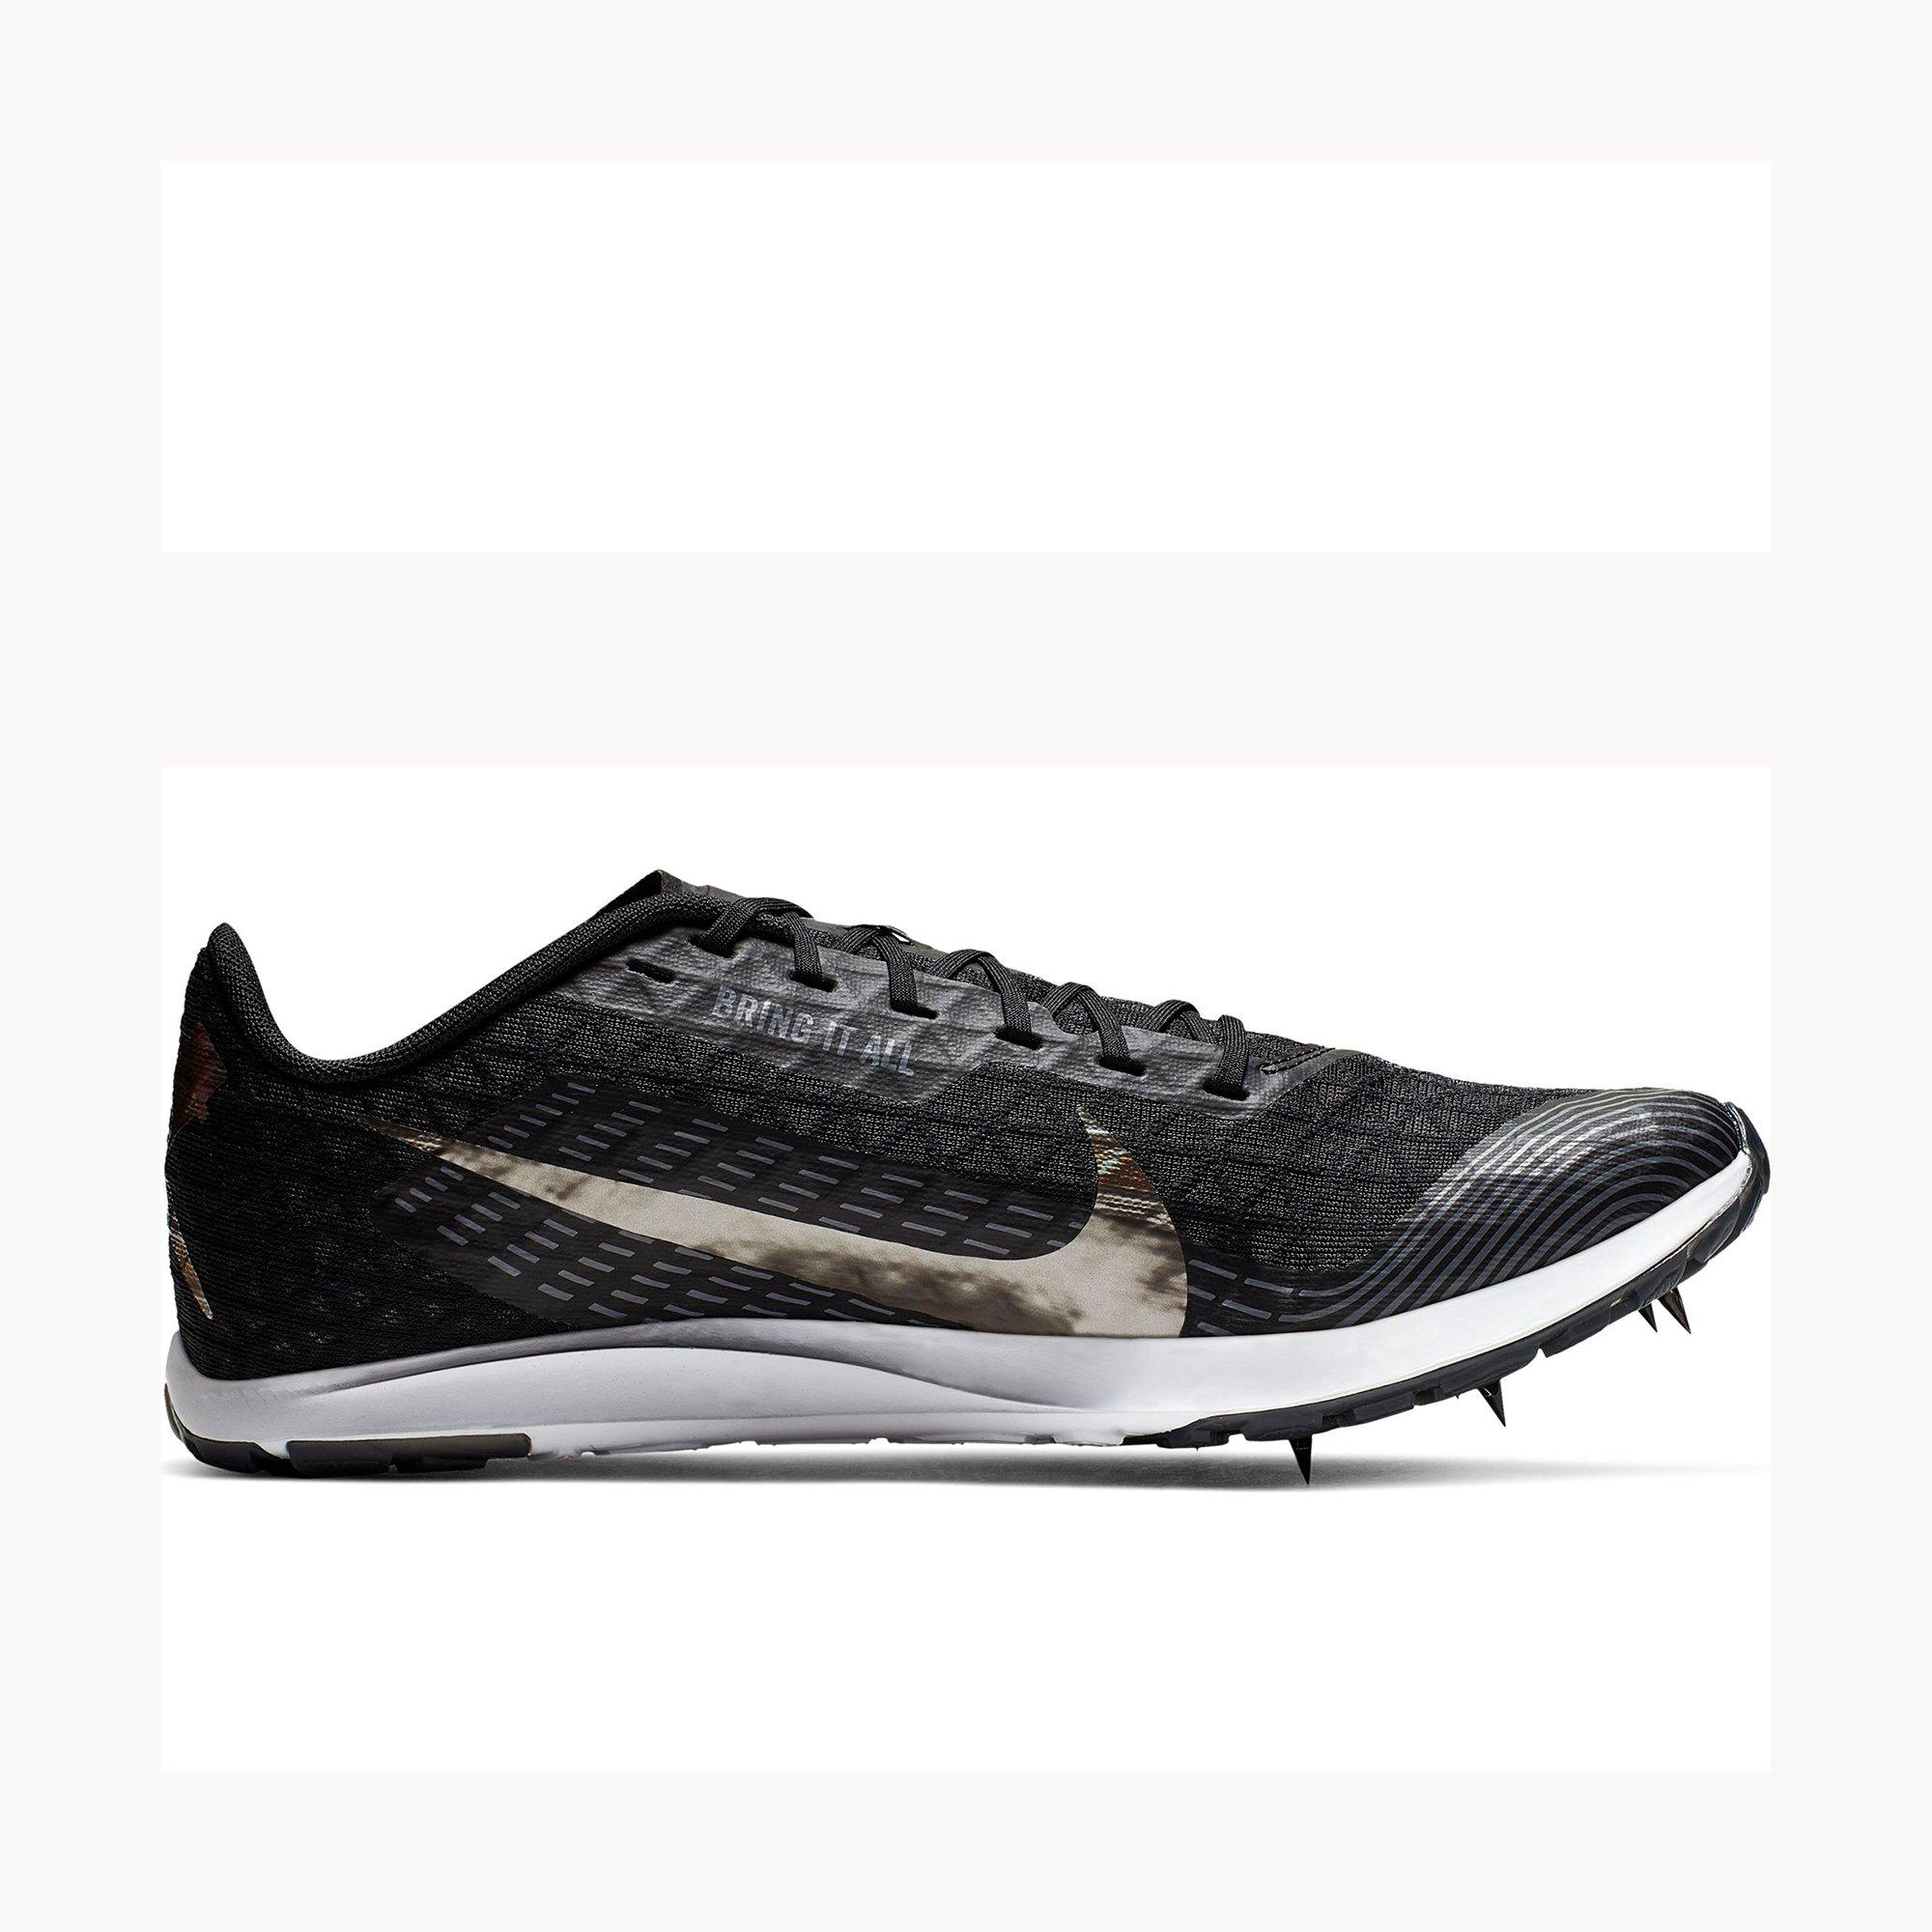 nike women's zoom rival xc 2019 cross country shoes